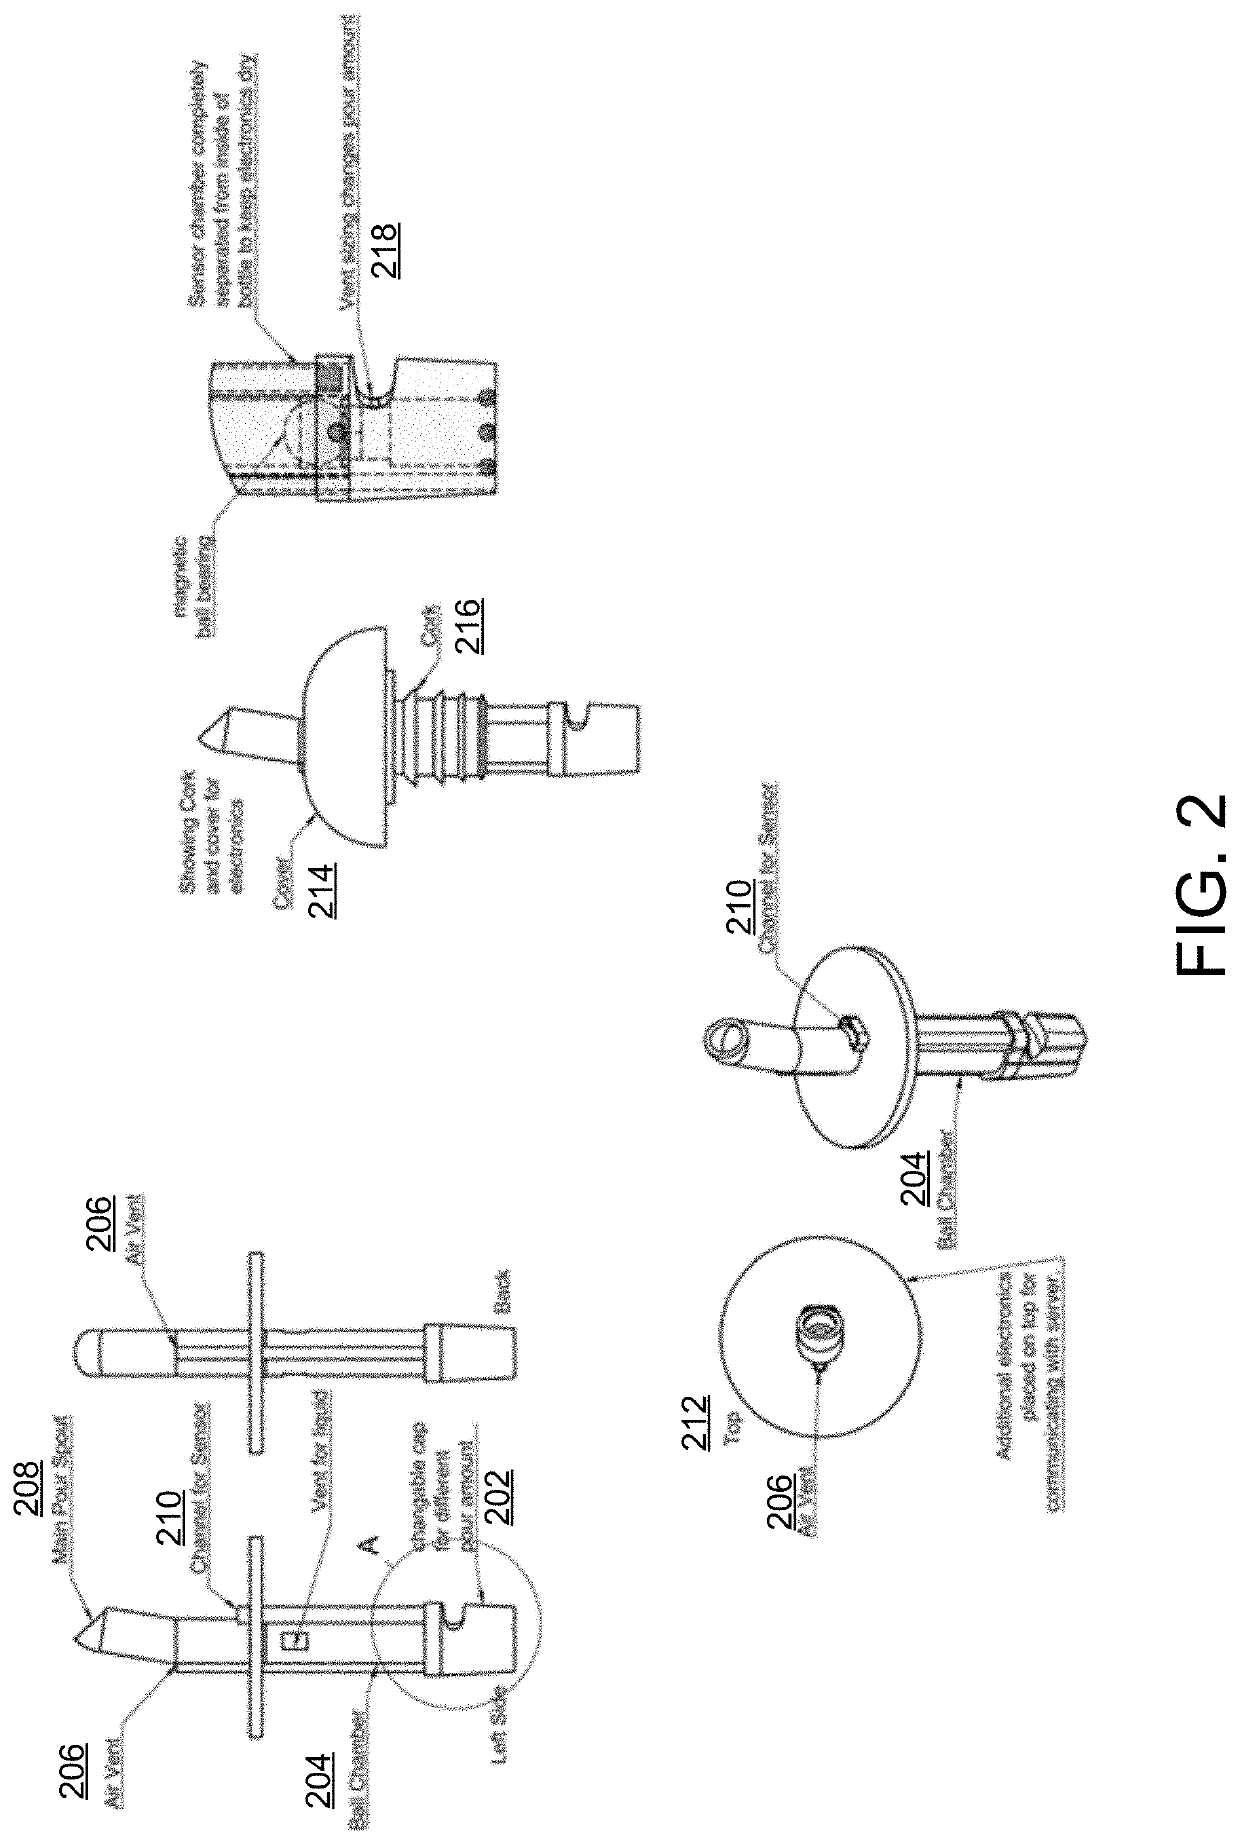 Methods, systems, and devices for beverage consumption and inventory control and tracking